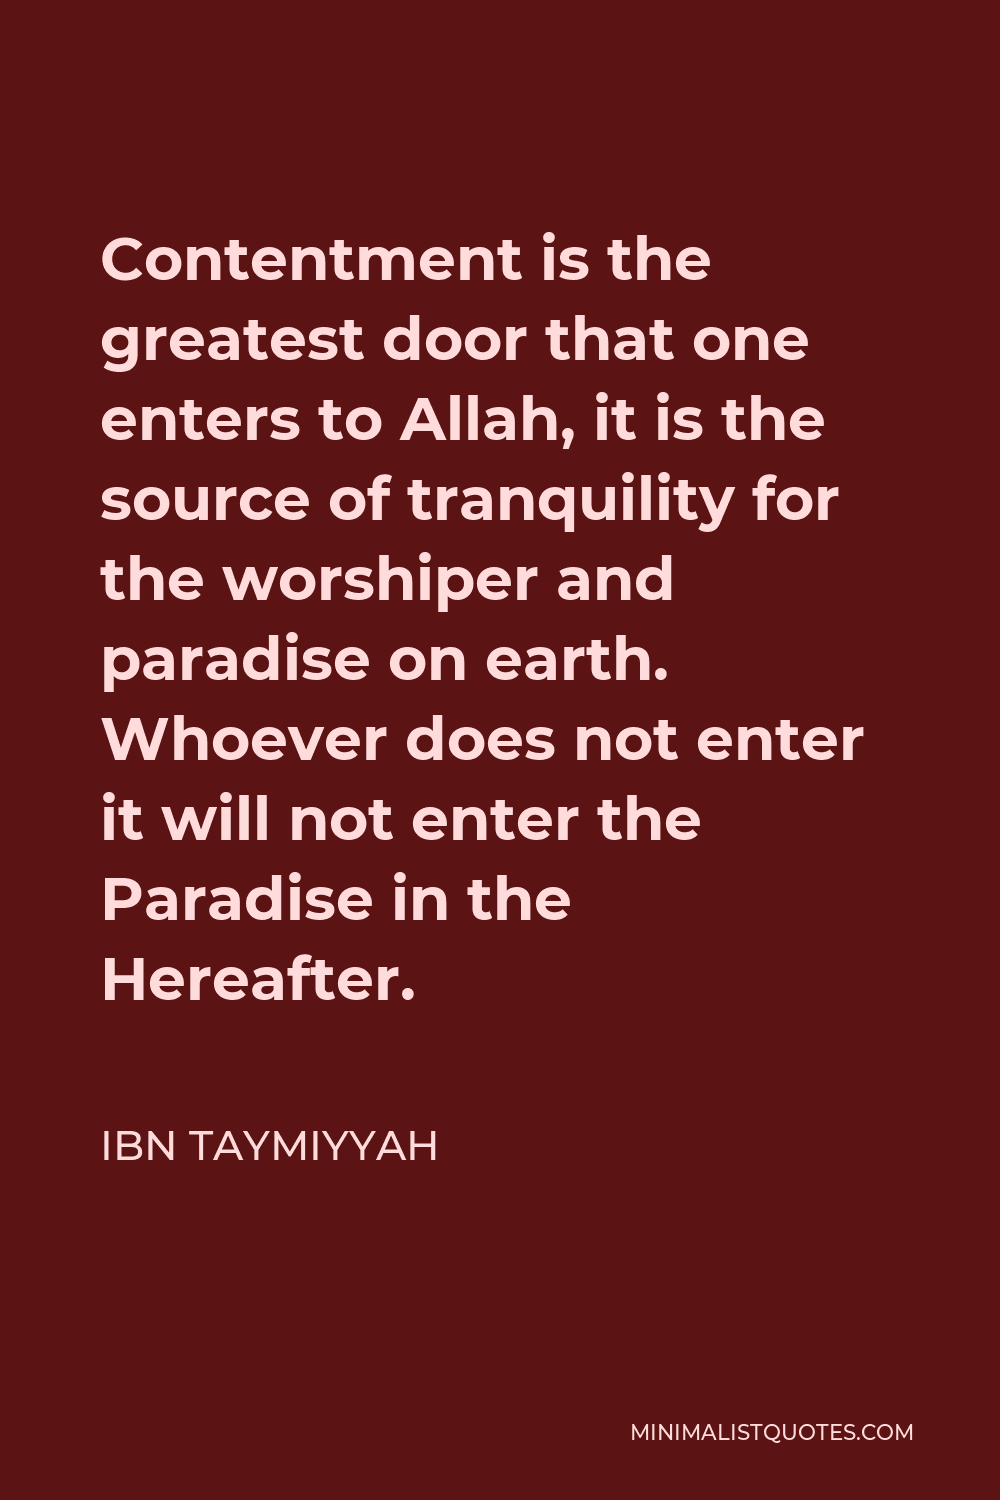 Ibn Taymiyyah Quote - Contentment is the greatest door that one enters to Allah, it is the source of tranquility for the worshiper and paradise on earth. Whoever does not enter it will not enter the Paradise in the Hereafter.